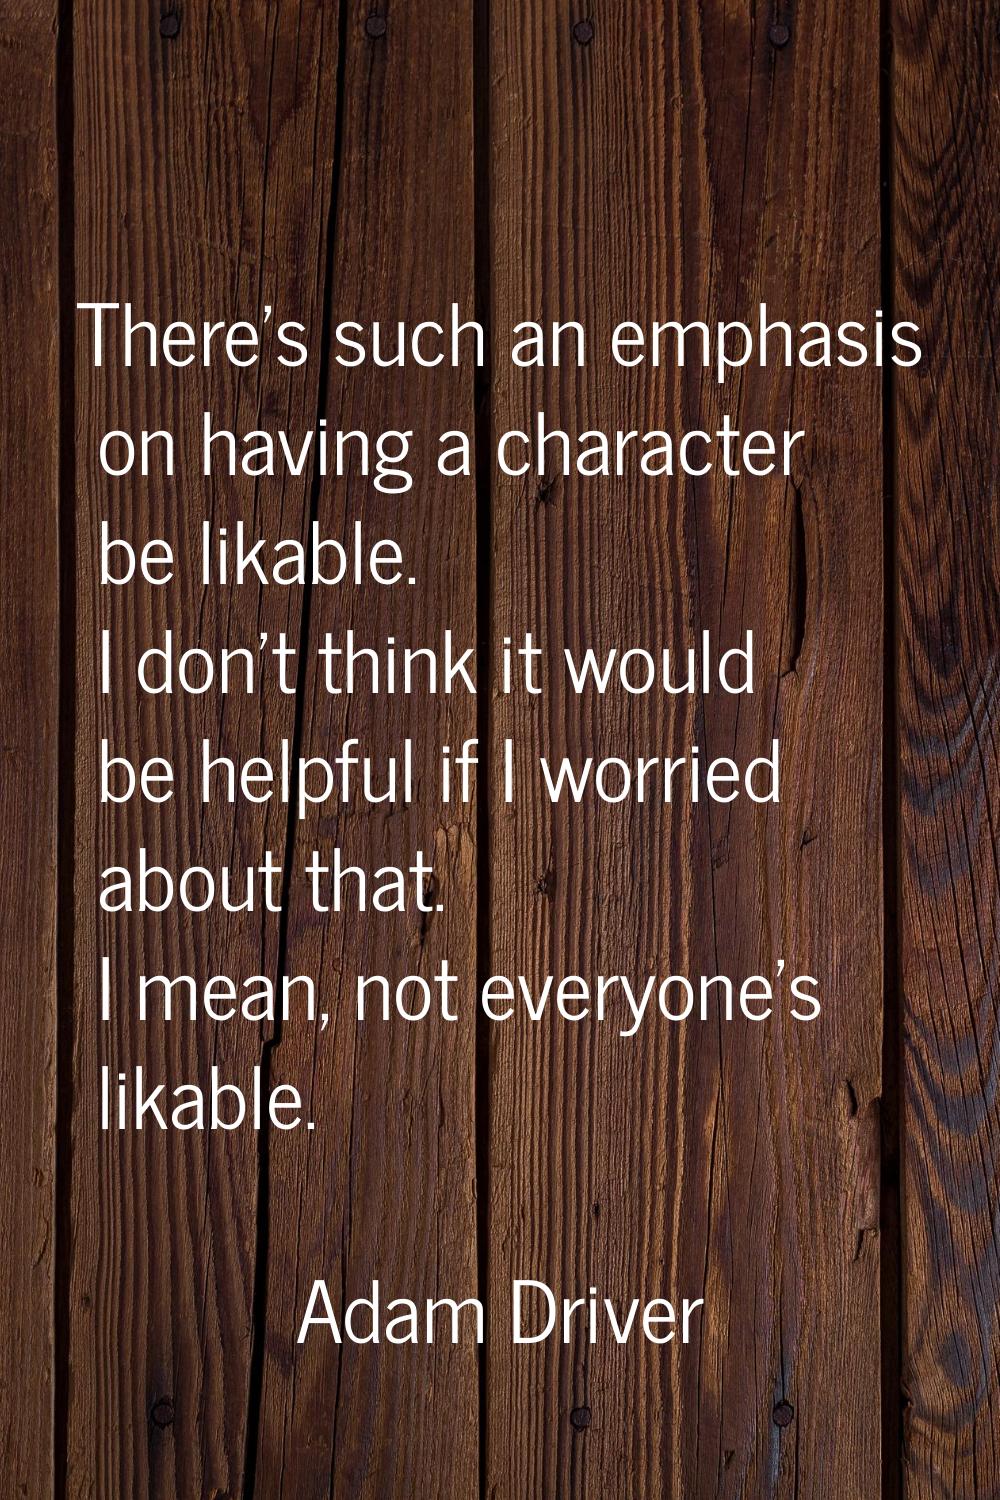 There's such an emphasis on having a character be likable. I don't think it would be helpful if I w